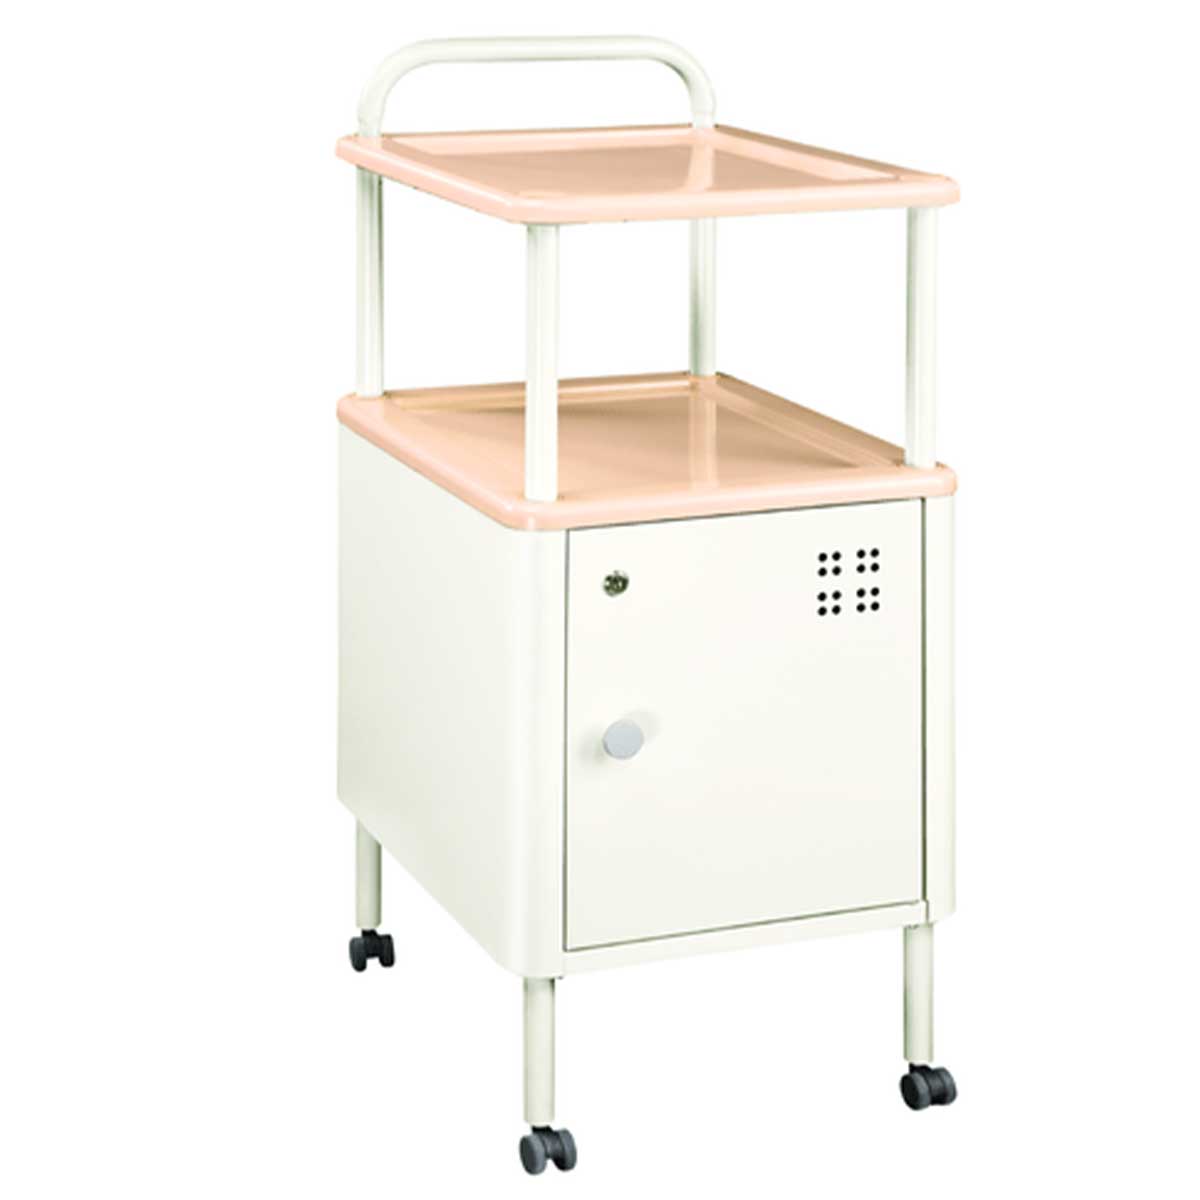 Laboratory Table Manufacturers, Suppliers in Dwarka Sector 27